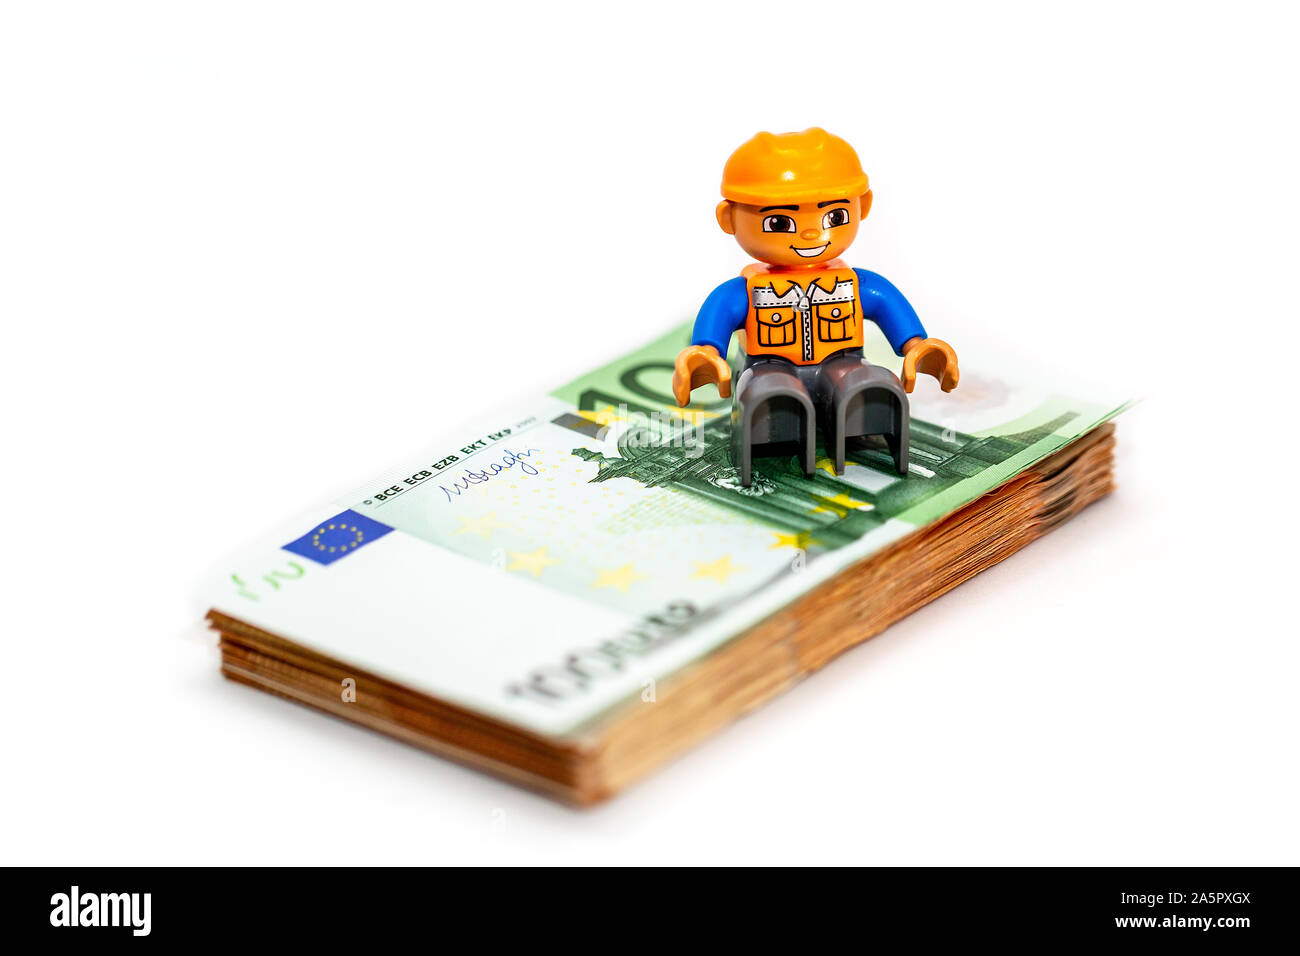 Minifigure toy worker model standing of a pilo of euro banknote, money. Lego minifigures are manufactured by the Lego Group Stock Photo